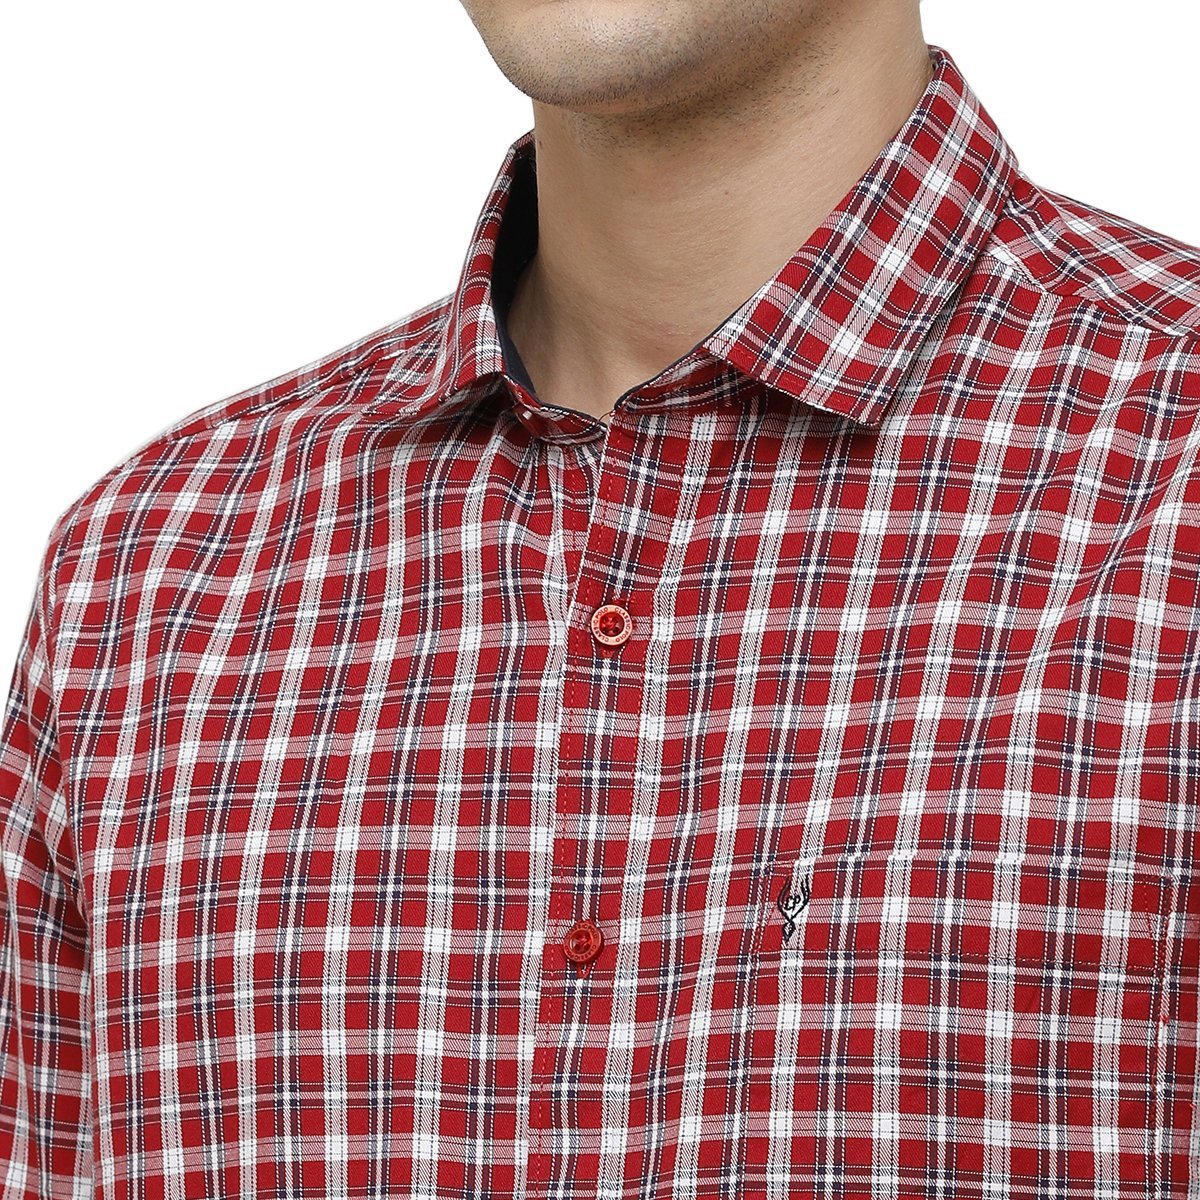 Classic Polo Mens Collar Neck Full Sleeve Red Smart Fit 100% Cotton Woven Shirt SM1-70 A-FS-CHK-SF Shirts Classic Polo 